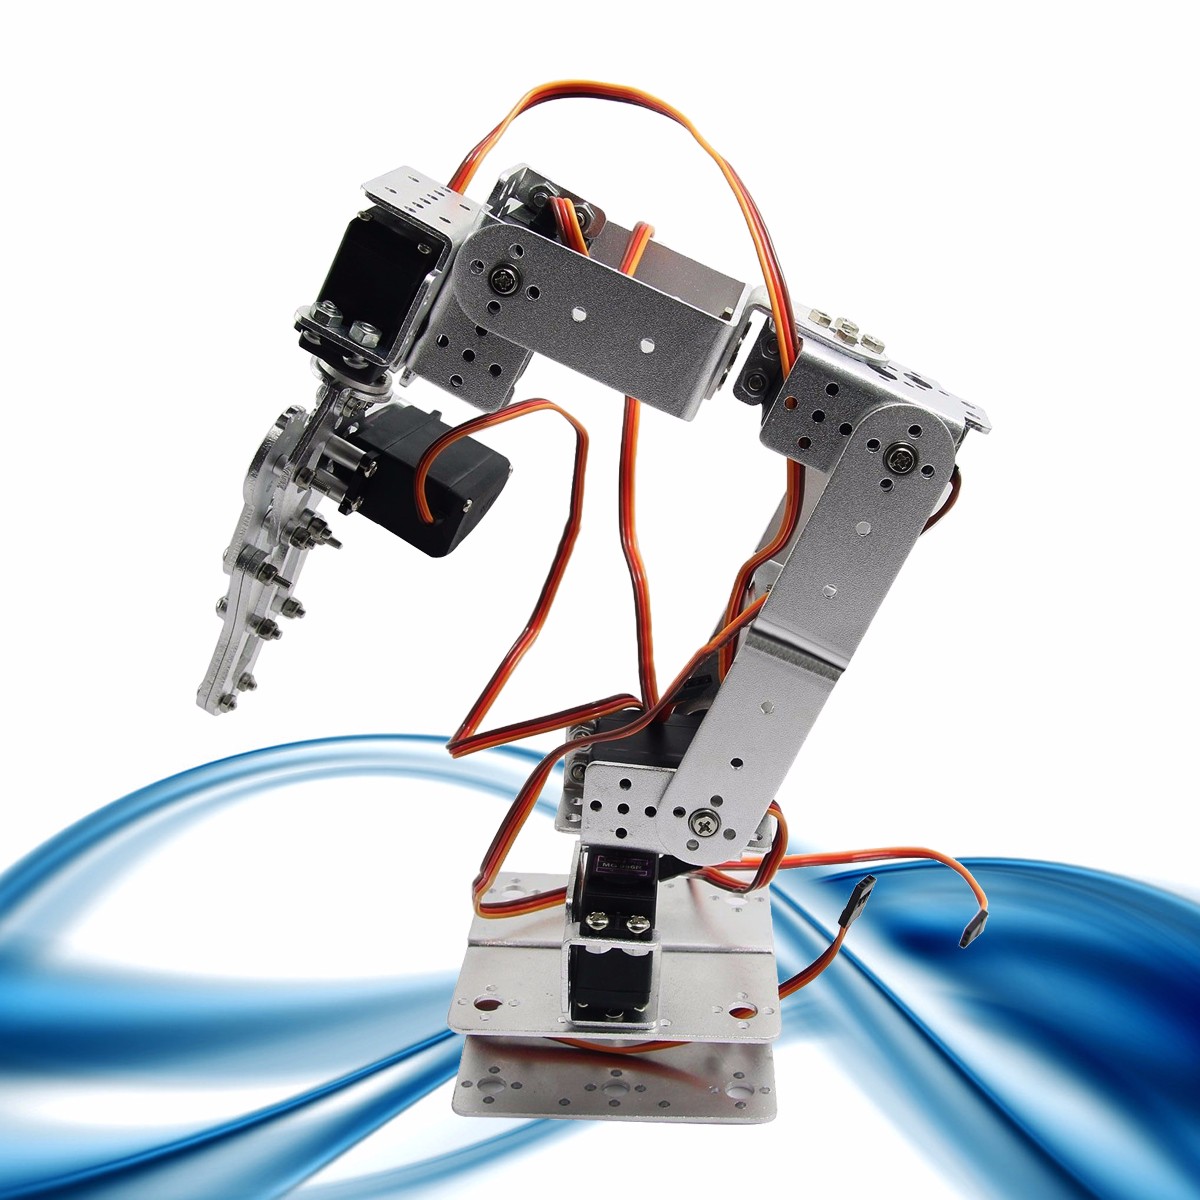 ROT2U 6DOF Aluminium Robot Arm Clamp Claw Mount Kit With Servos For Arduino-Silver 85